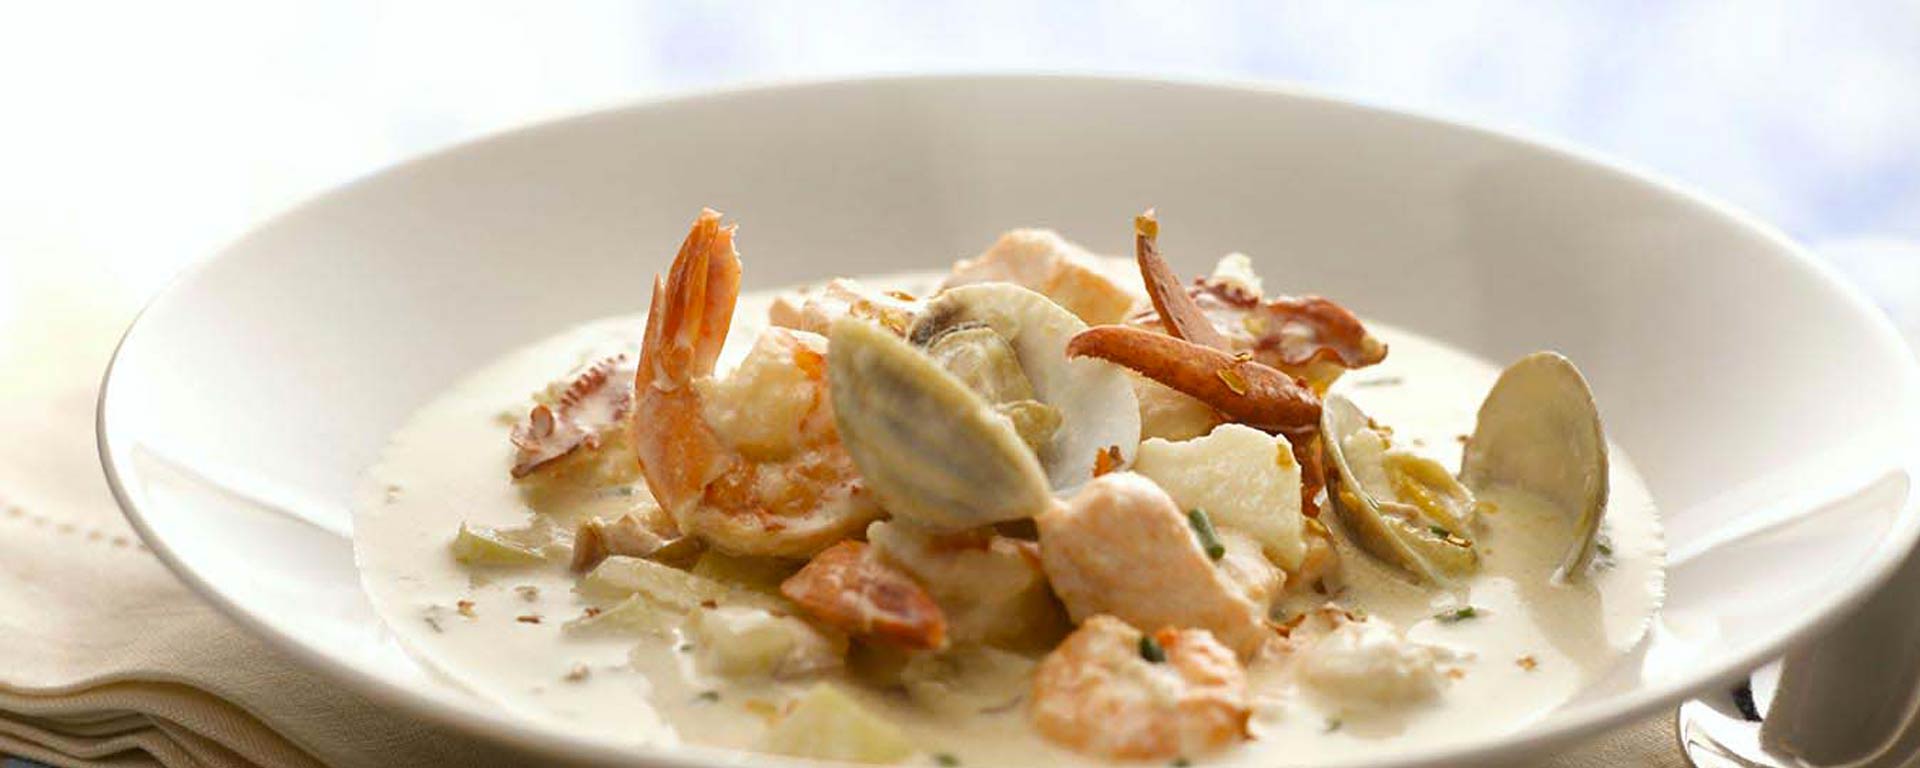 Photo for - Fairmont Seafood Chowder